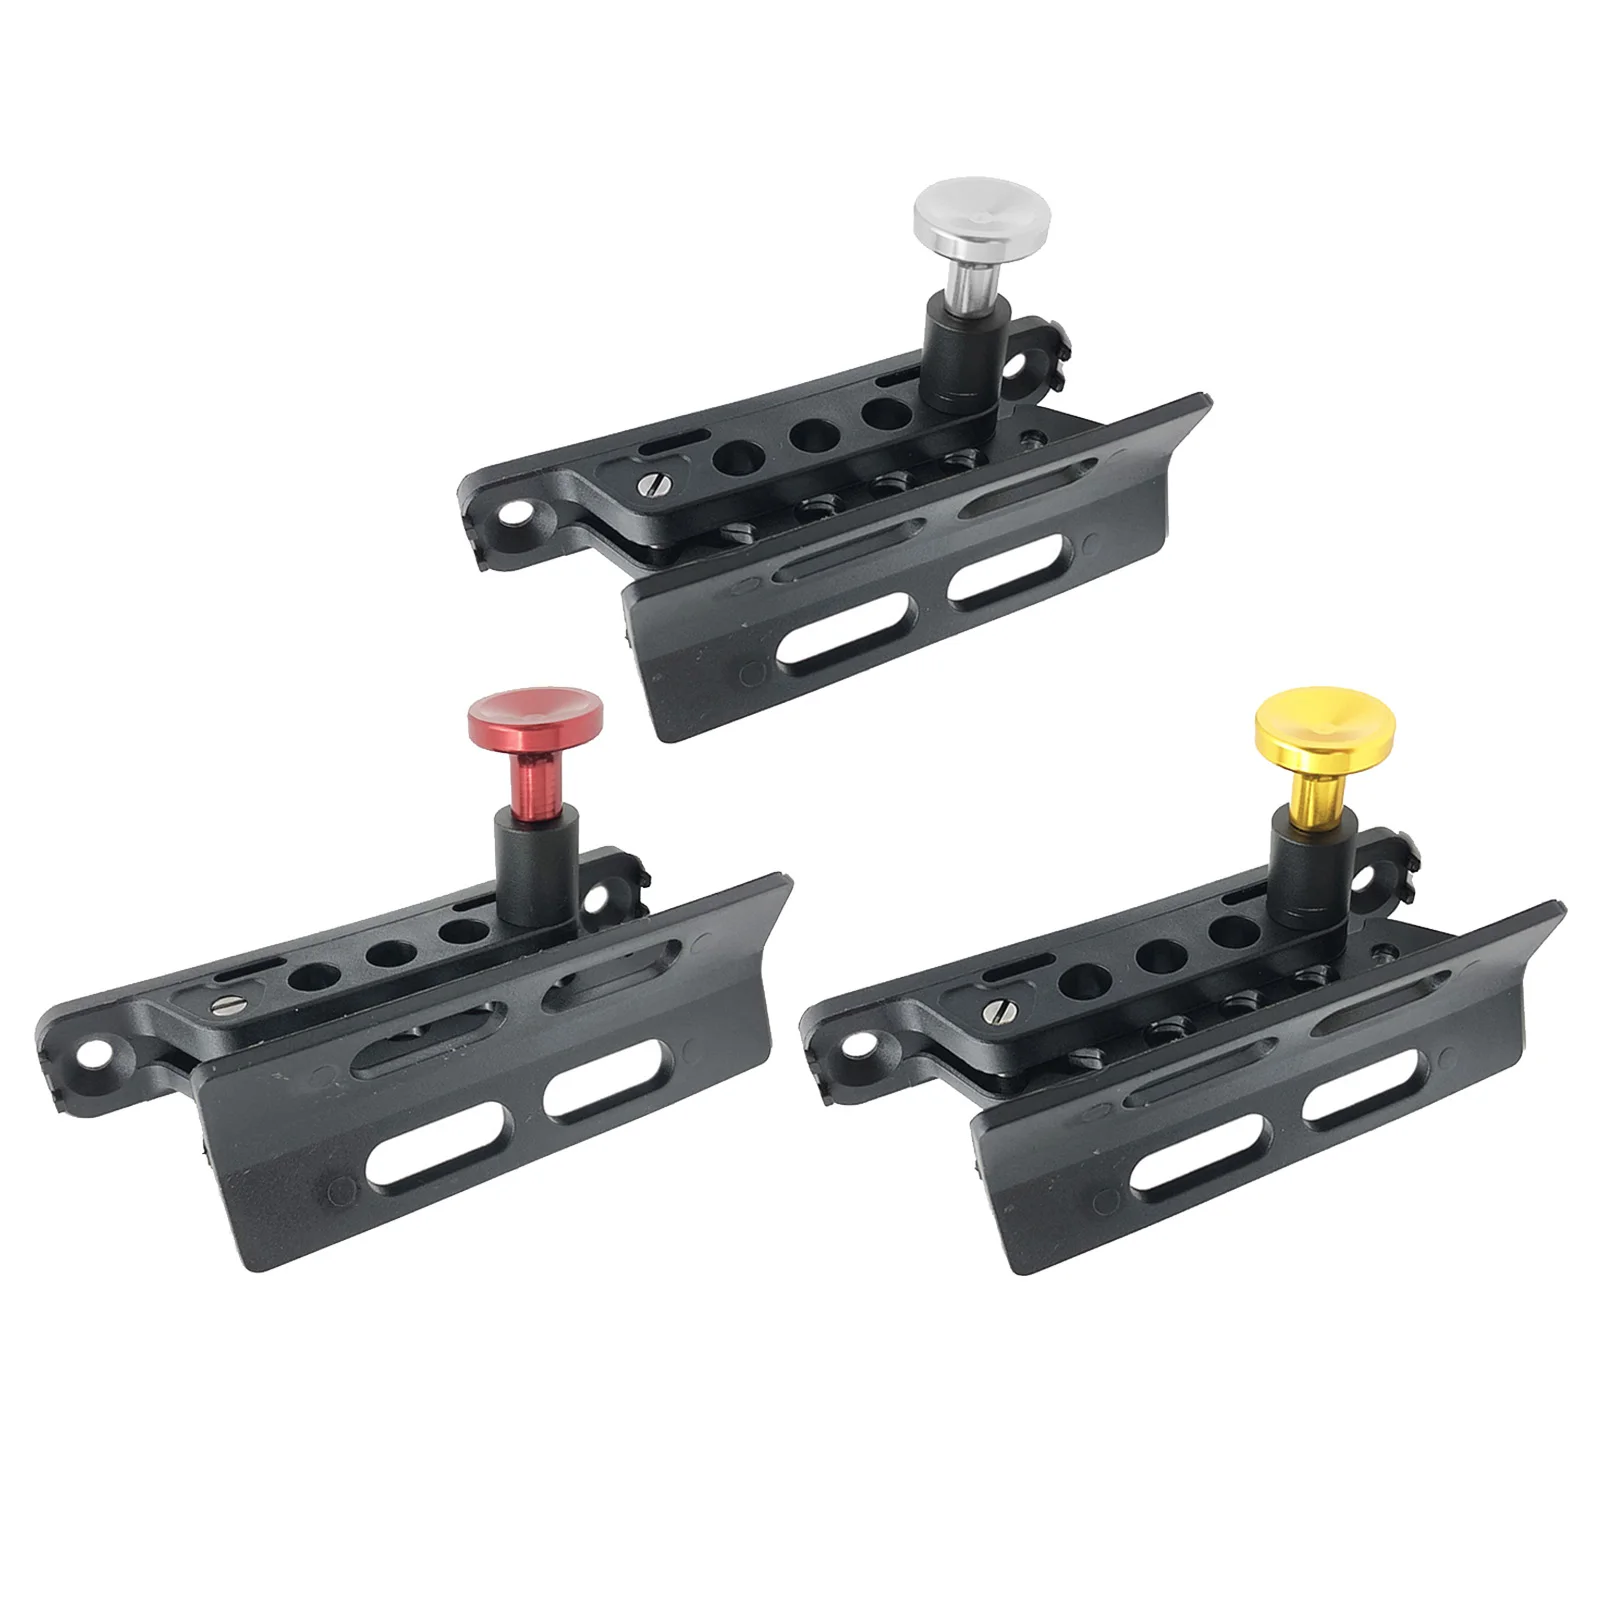 purpose Adjustable  Holder Mount (4  extra rings for spare using) Fit for   UTV